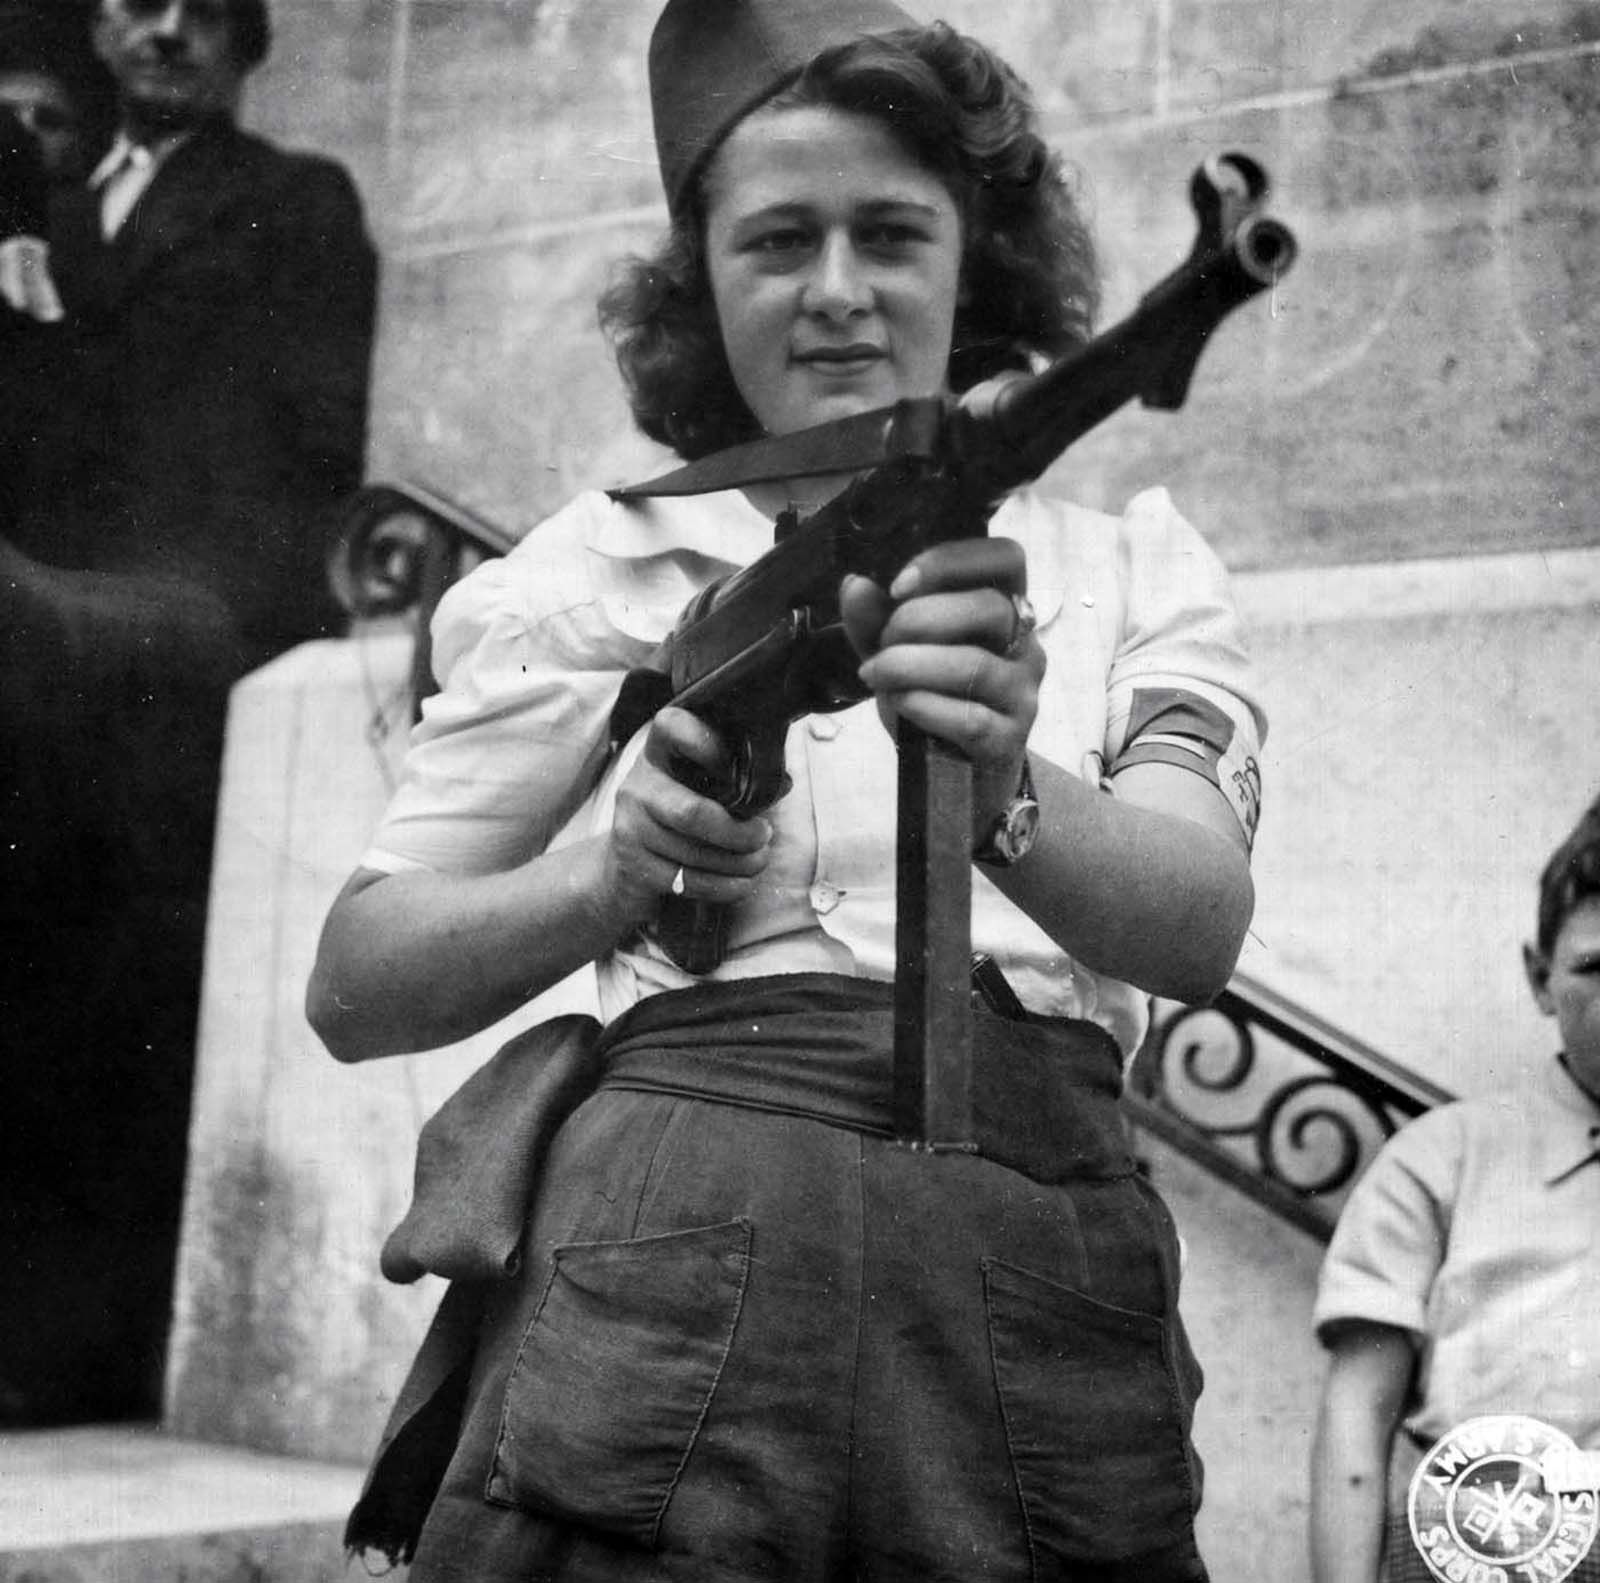 Simone Segouin, the 18 year old French Résistance fighter, 1944  (4).jpg